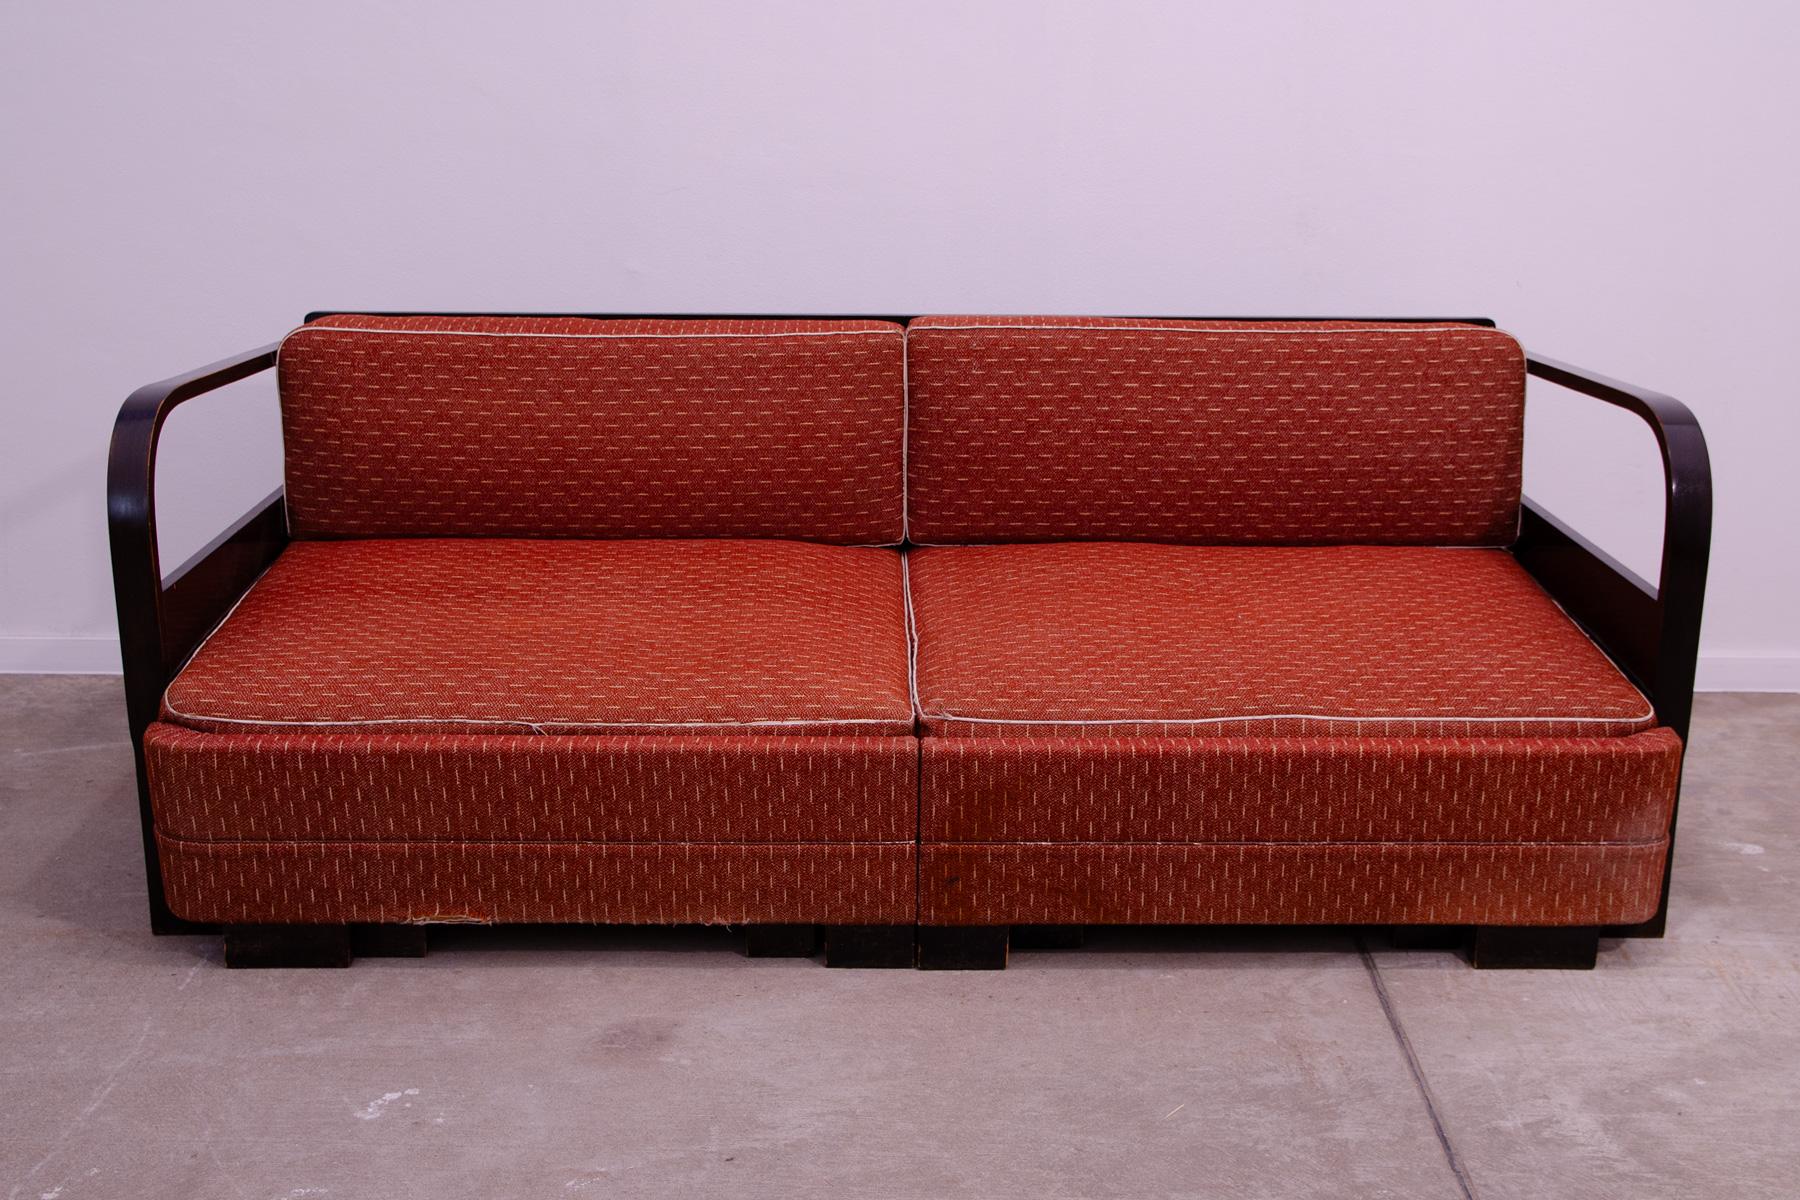 ART DECO style sofa, simple design fits into the context of the design creation in Czechoslovakia between 1930´s-1950´s. Dark stained beech wood. Traces of wear and tear commensurate with age. In good vintage condition. It´s possible to assemble a